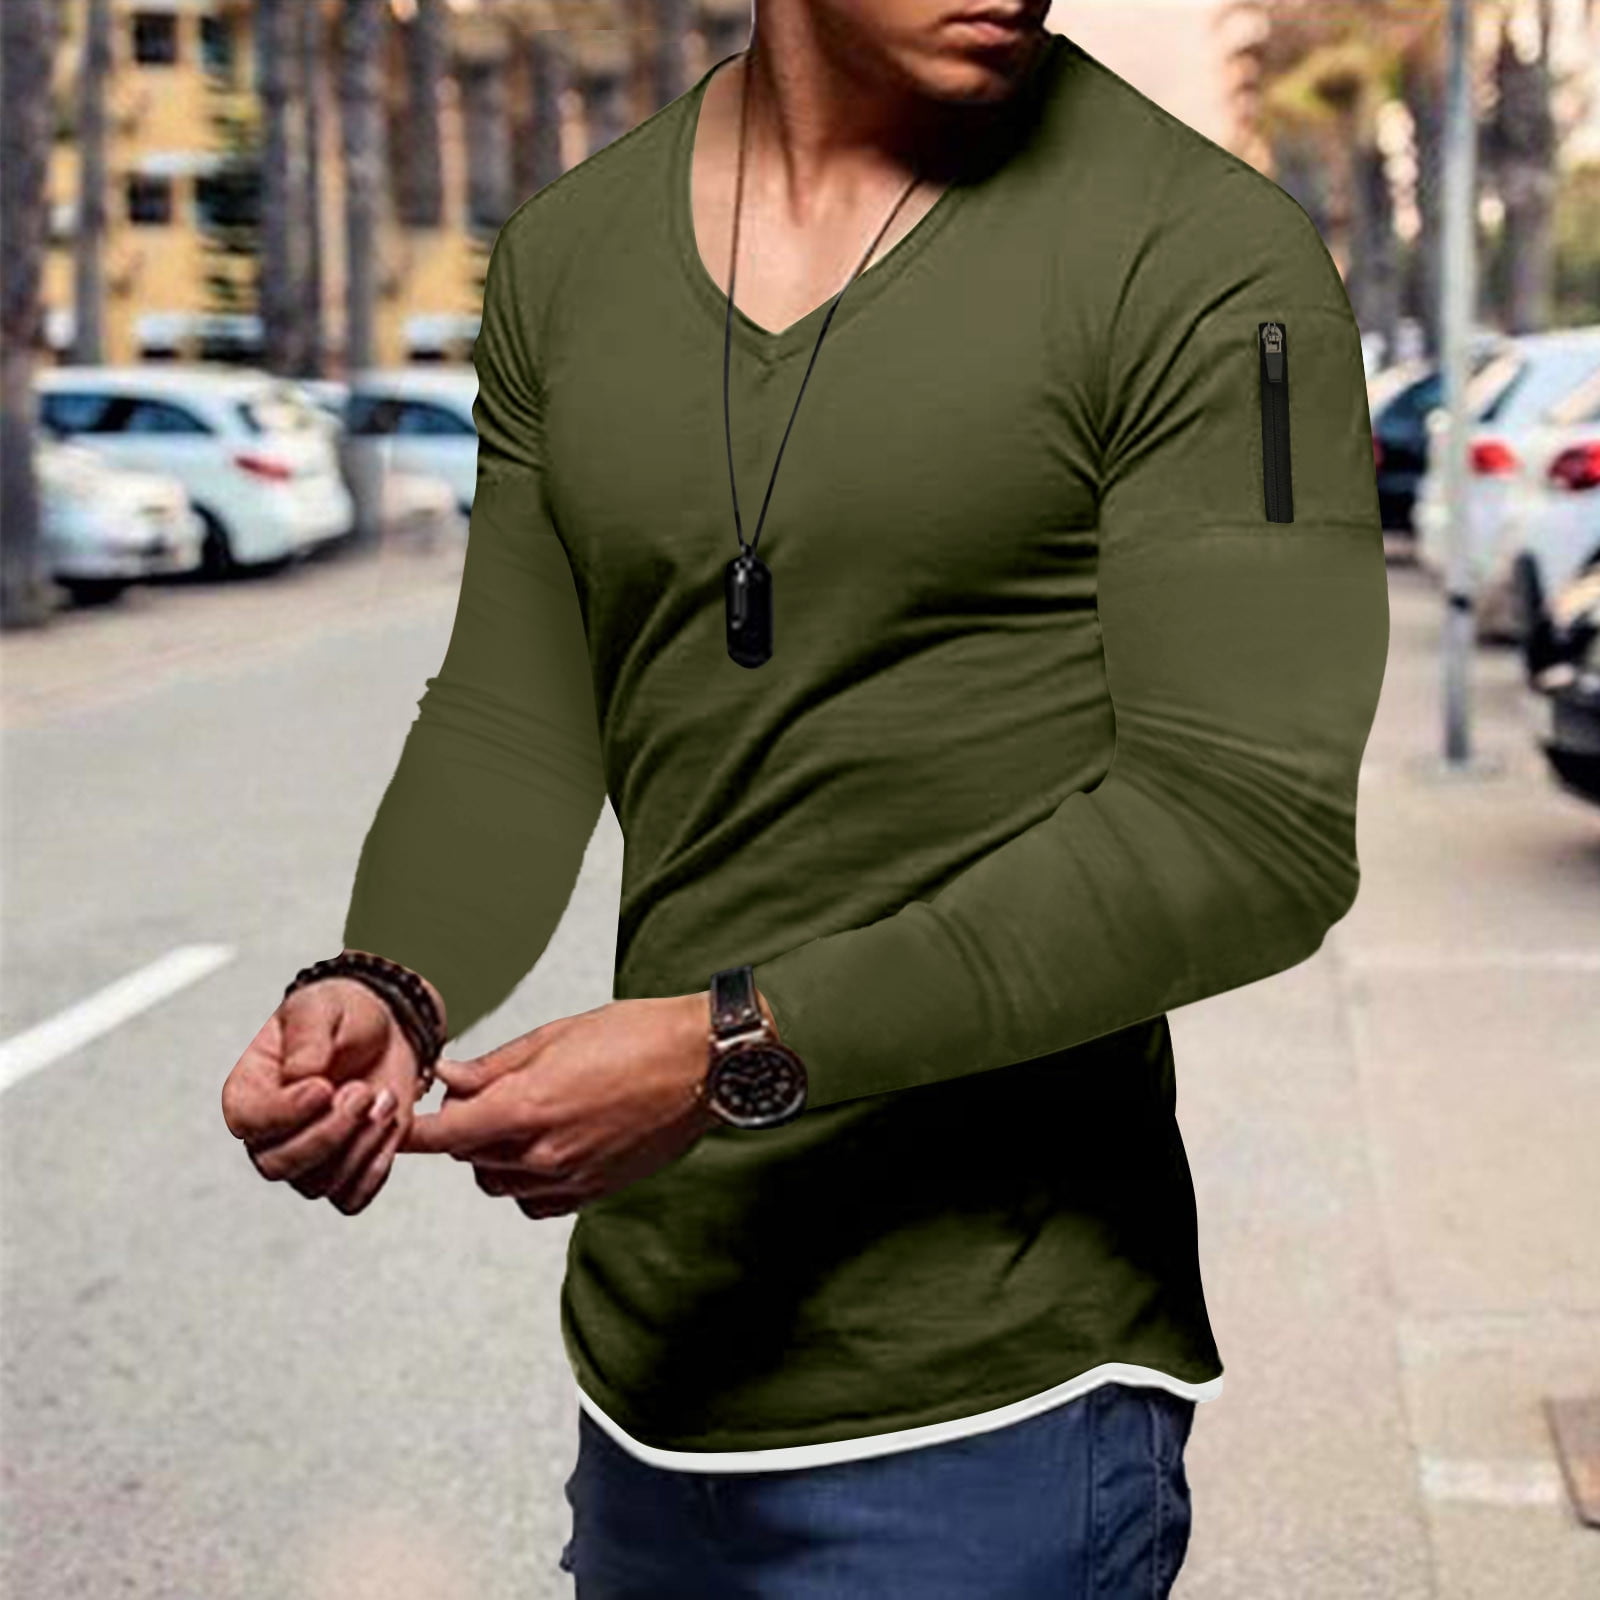 FRXSWW Mens Solid Color Blouse Long Sleeves Pullover Casual T Shirts for Men Outdoor Activewear Leisure Sports Fitness Tops, Women's, Size: 2XL, Gray